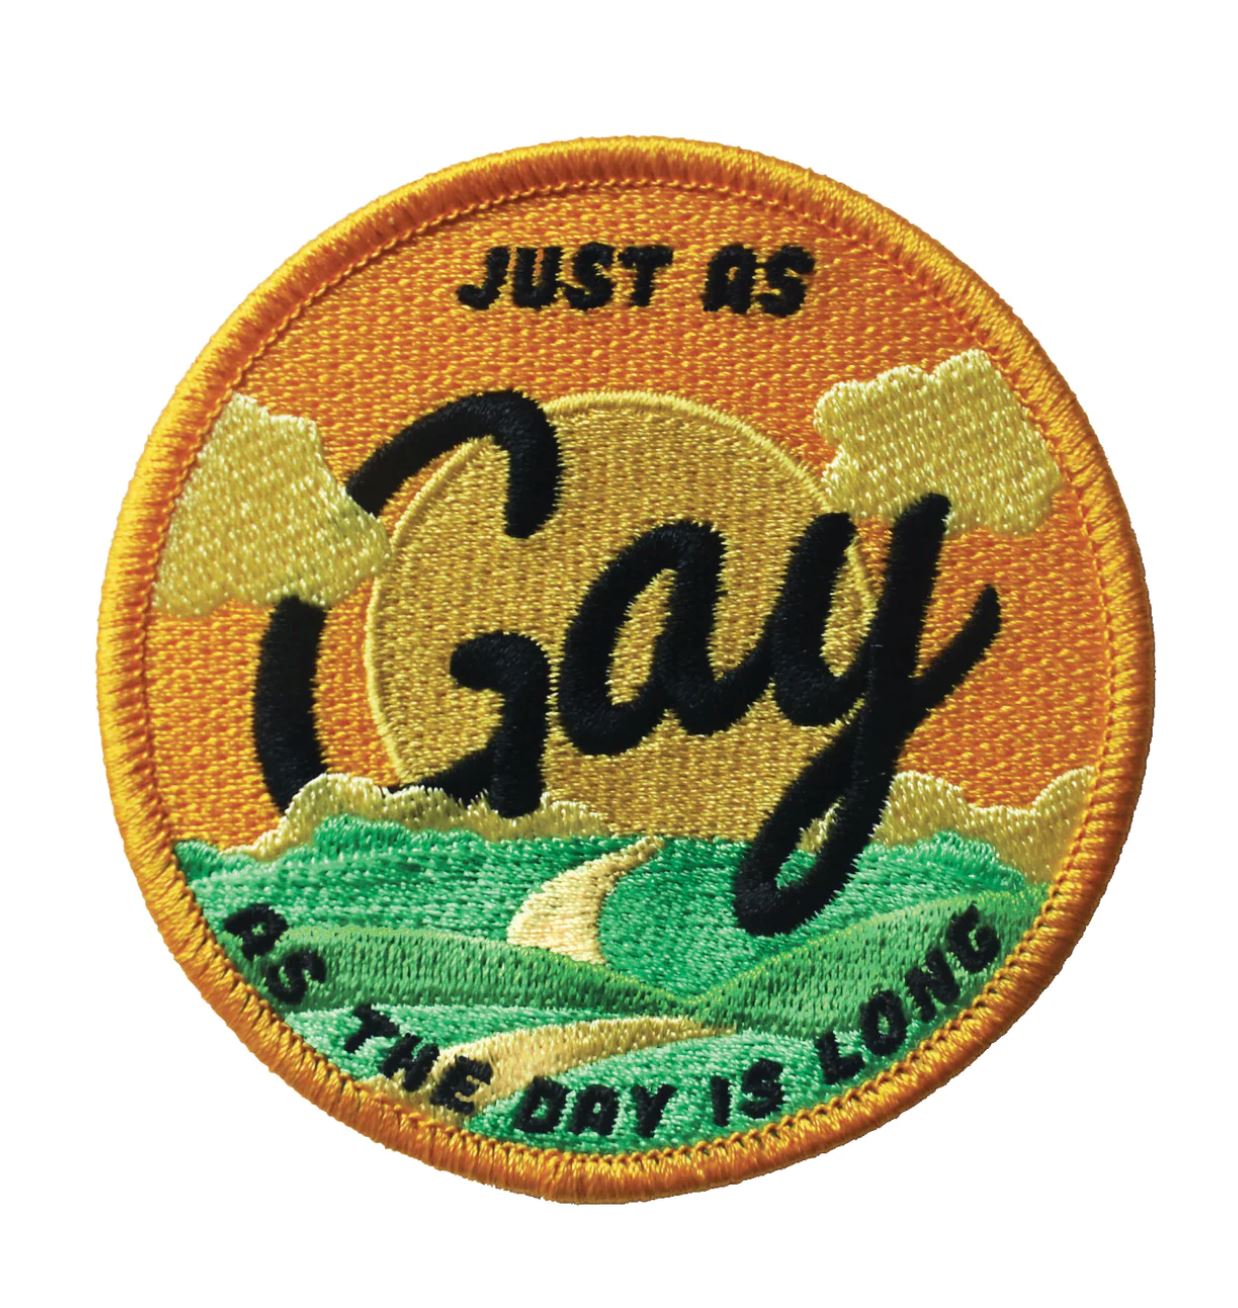 Just As Gay Embroidered Patch x Retrograde Supply Co. - Third Drawer Down